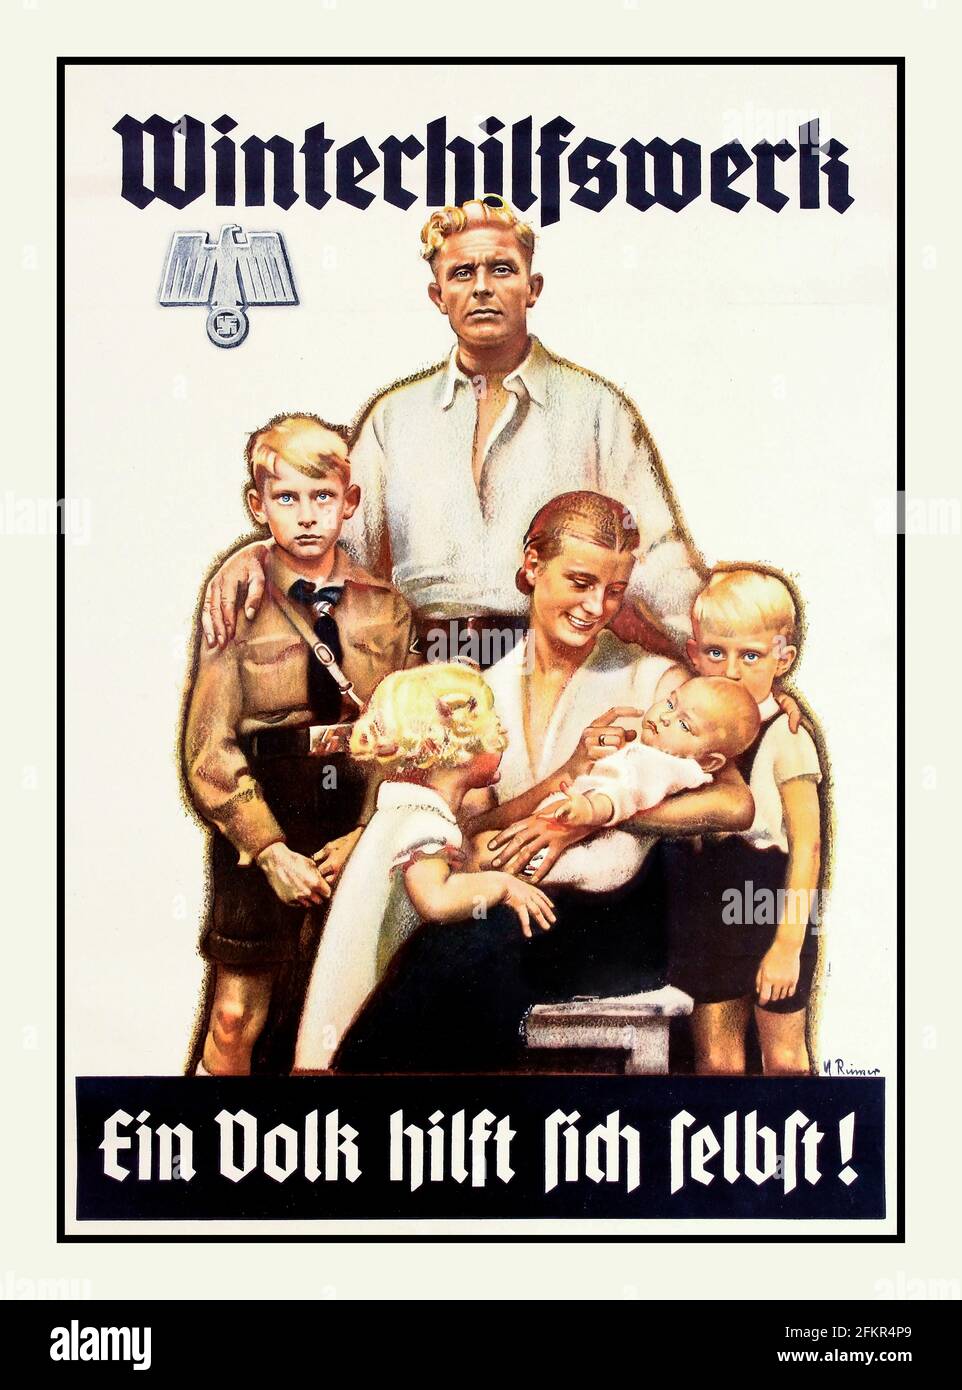 Nazi Propaganda original vintage poster WINTERHILFSWERK - EIN VOLK HILFT SICH SELBST!  WINTER RELIEF WORK - A PEOPLE HELPS ITSELF” Image of an ideal Aryan family with eagle holding a swastika in the top left corner. The Winterhilfswerk des Deutschen Volkes (English: 'Winter Relief of the German People'), commonly known by its abbreviated form Winterhilfswerk or WHW, was an annual drive by the Nationalsozialistische Volkswohlfahrt (National Socialist People’s Welfare Organization) to help finance charitable work in the Third Reich. Its slogan was 'None shall starve or freeze'.Germany. Year 1930 Stock Photo